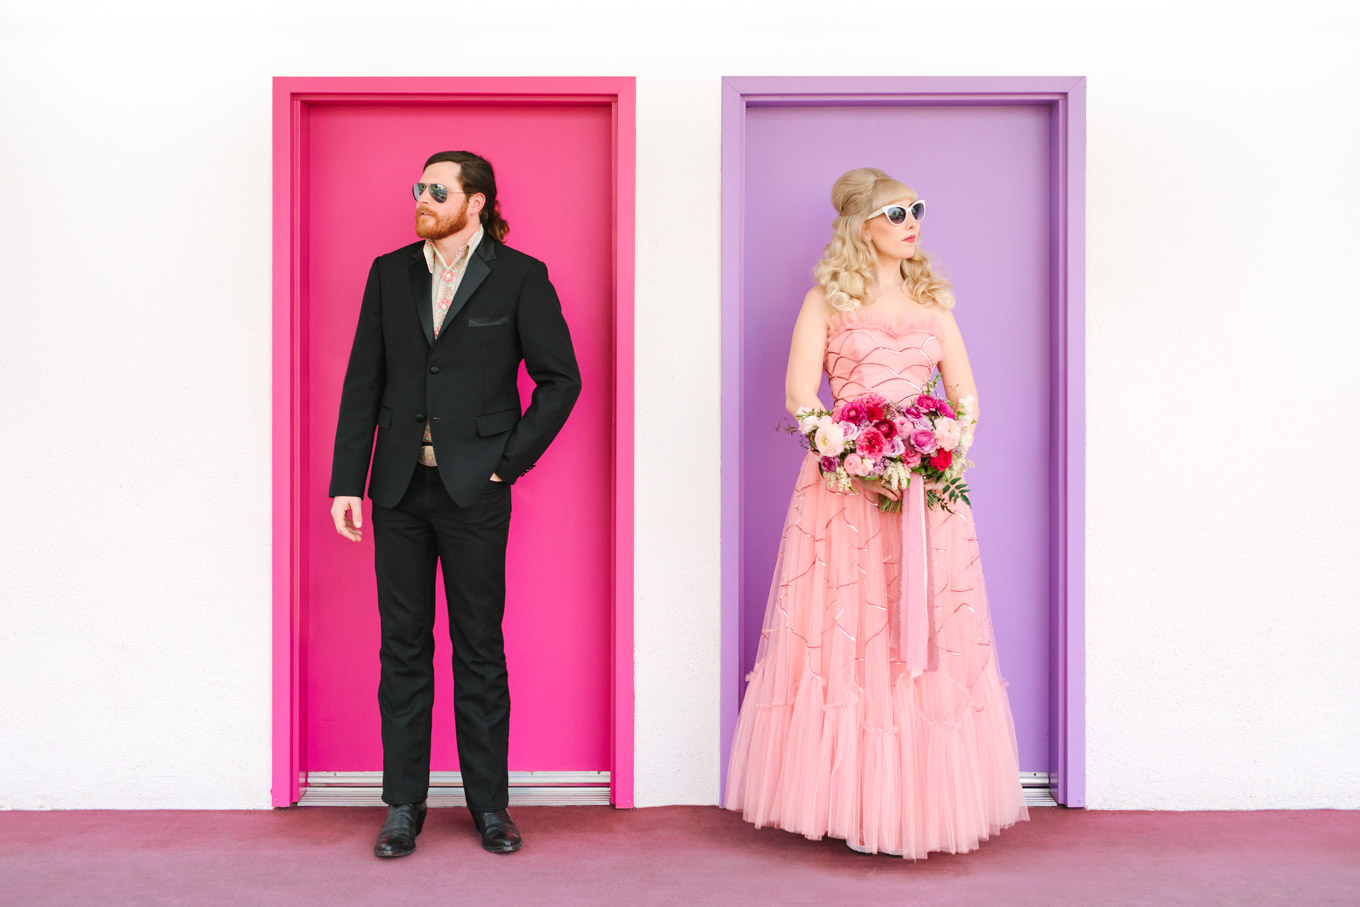 Colorful couple at Saguaro Hotel. Modern vintage-inspired Palm Springs engagement session with a 1960s pink Cadillac, retro clothing, and flowers by Shindig Chic. | Colorful and elevated wedding inspiration for fun-loving couples in Southern California | #engagementsession #PalmSpringsengagement #vintageweddingdress #floralcar #pinkcar   Source: Mary Costa Photography | Los Angeles